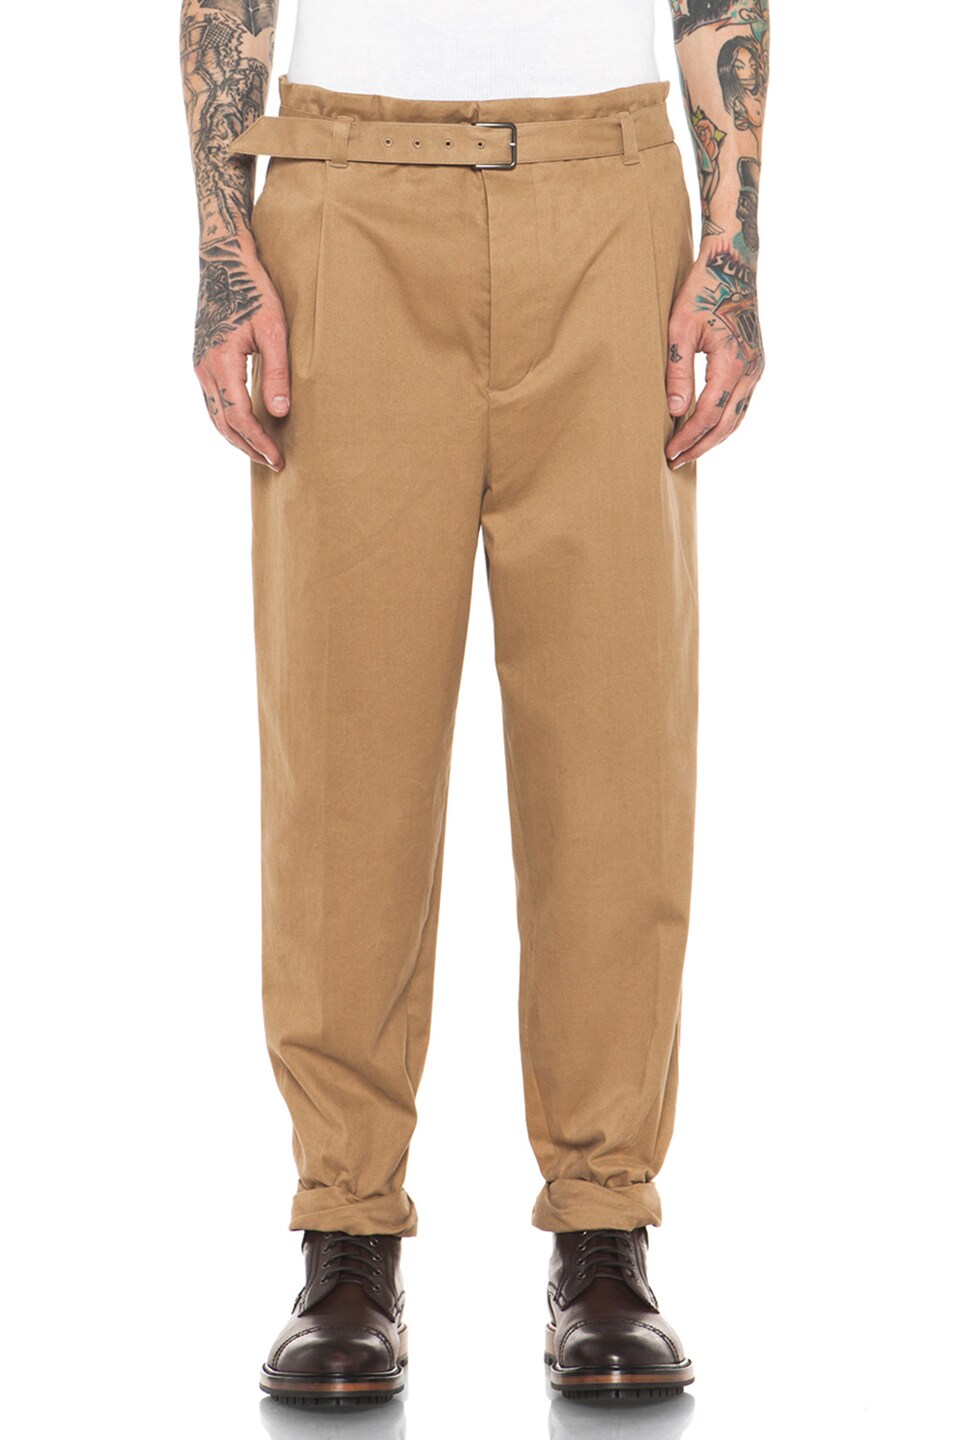 3.1 phillip lim Single Pleat Tapered Pant with Adjustable Waist in ...